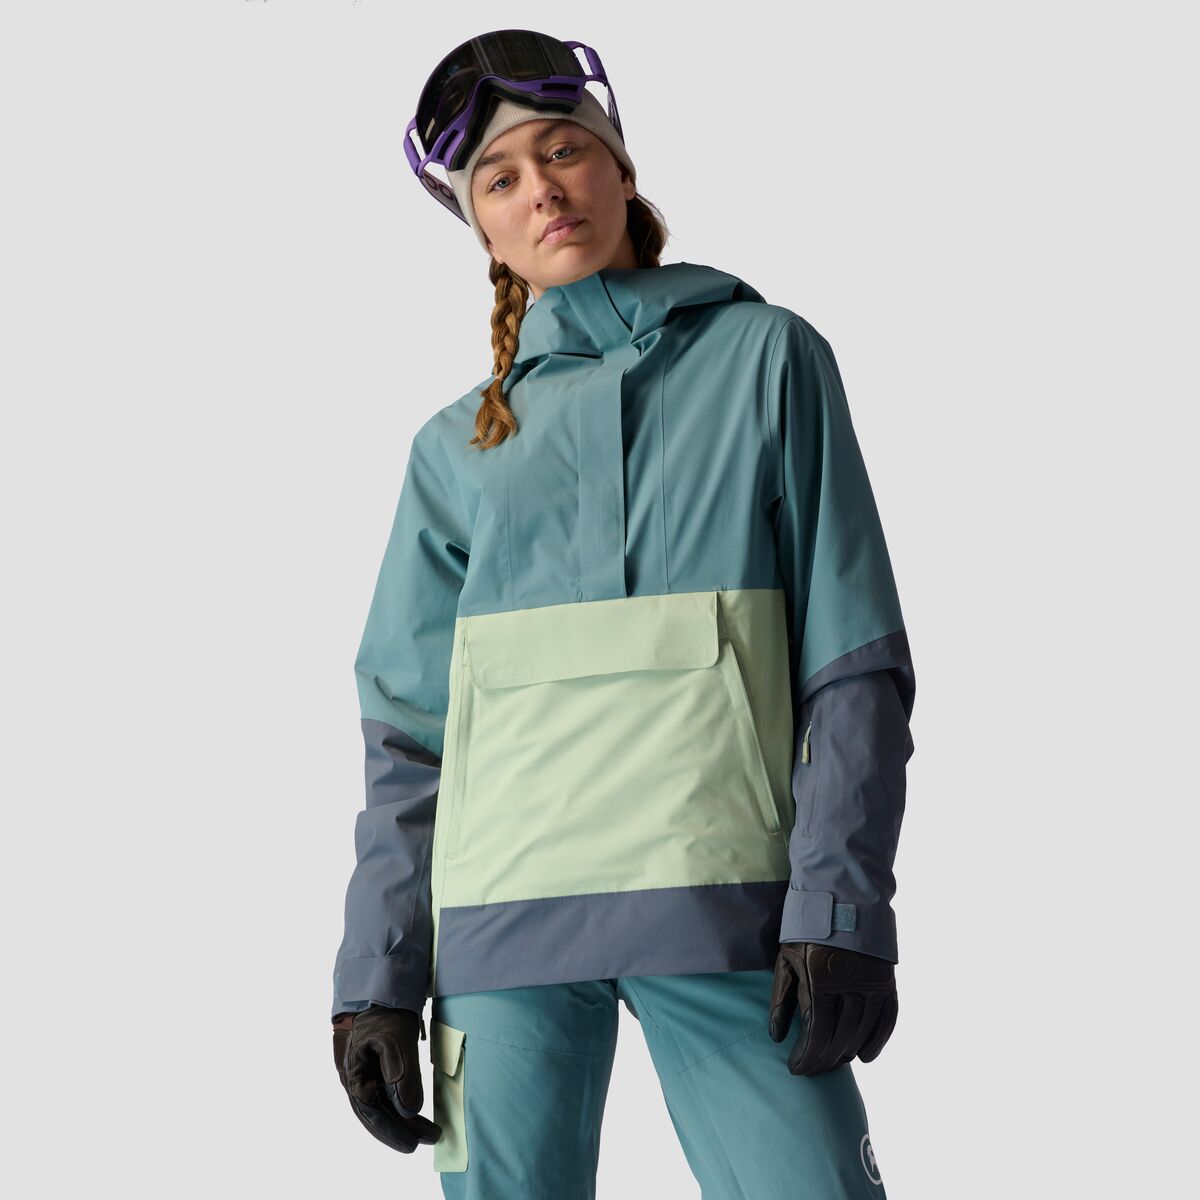 Backcountry Last Chair Stretch Insulated Anorak - Women's Goblin Blue/Reseda/Turbulence